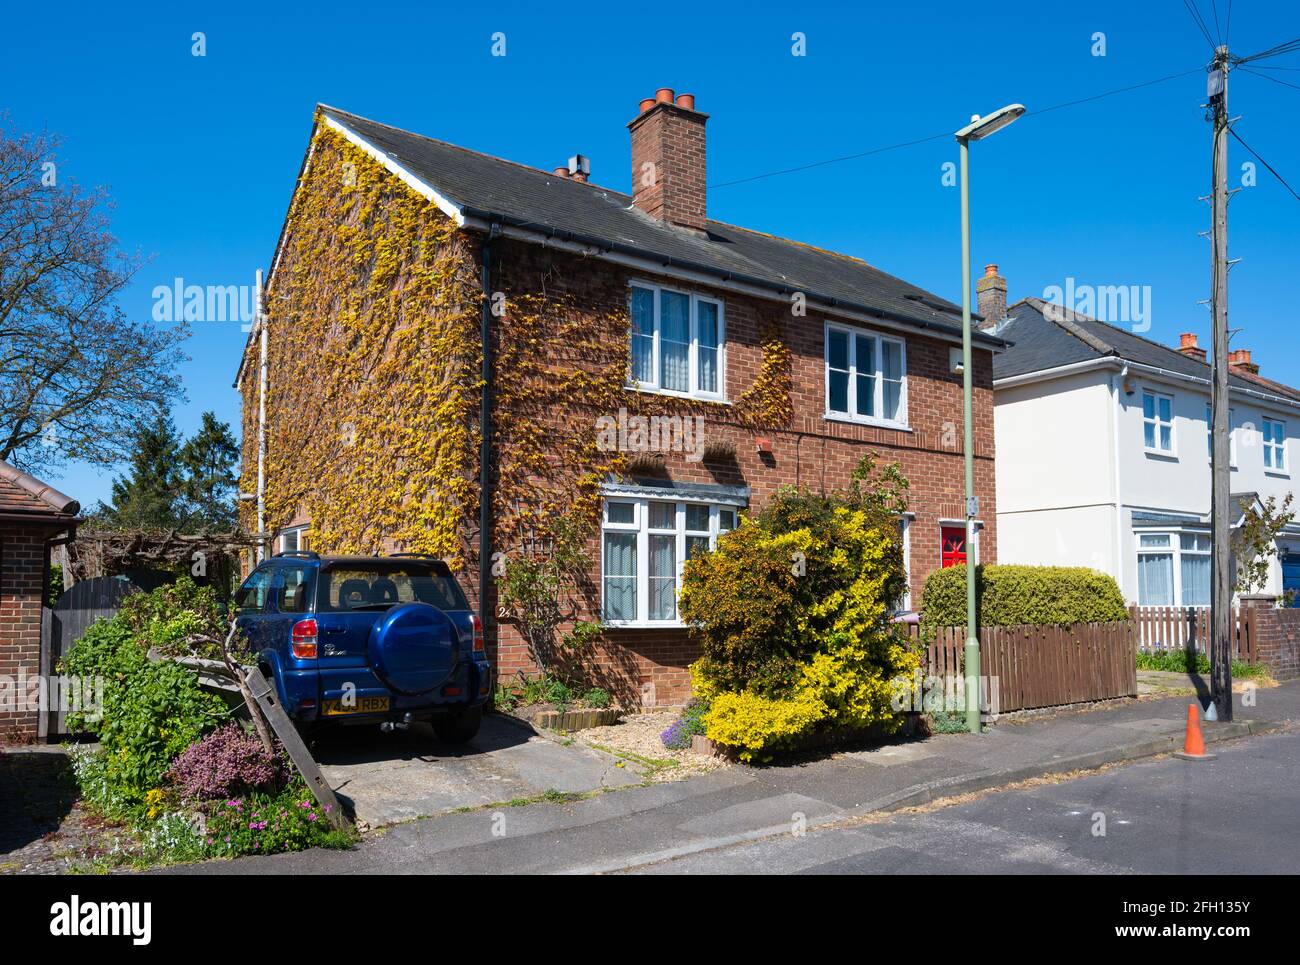 Climbing plants or creepers growing on the wall of a house in the UK. Stock Photo